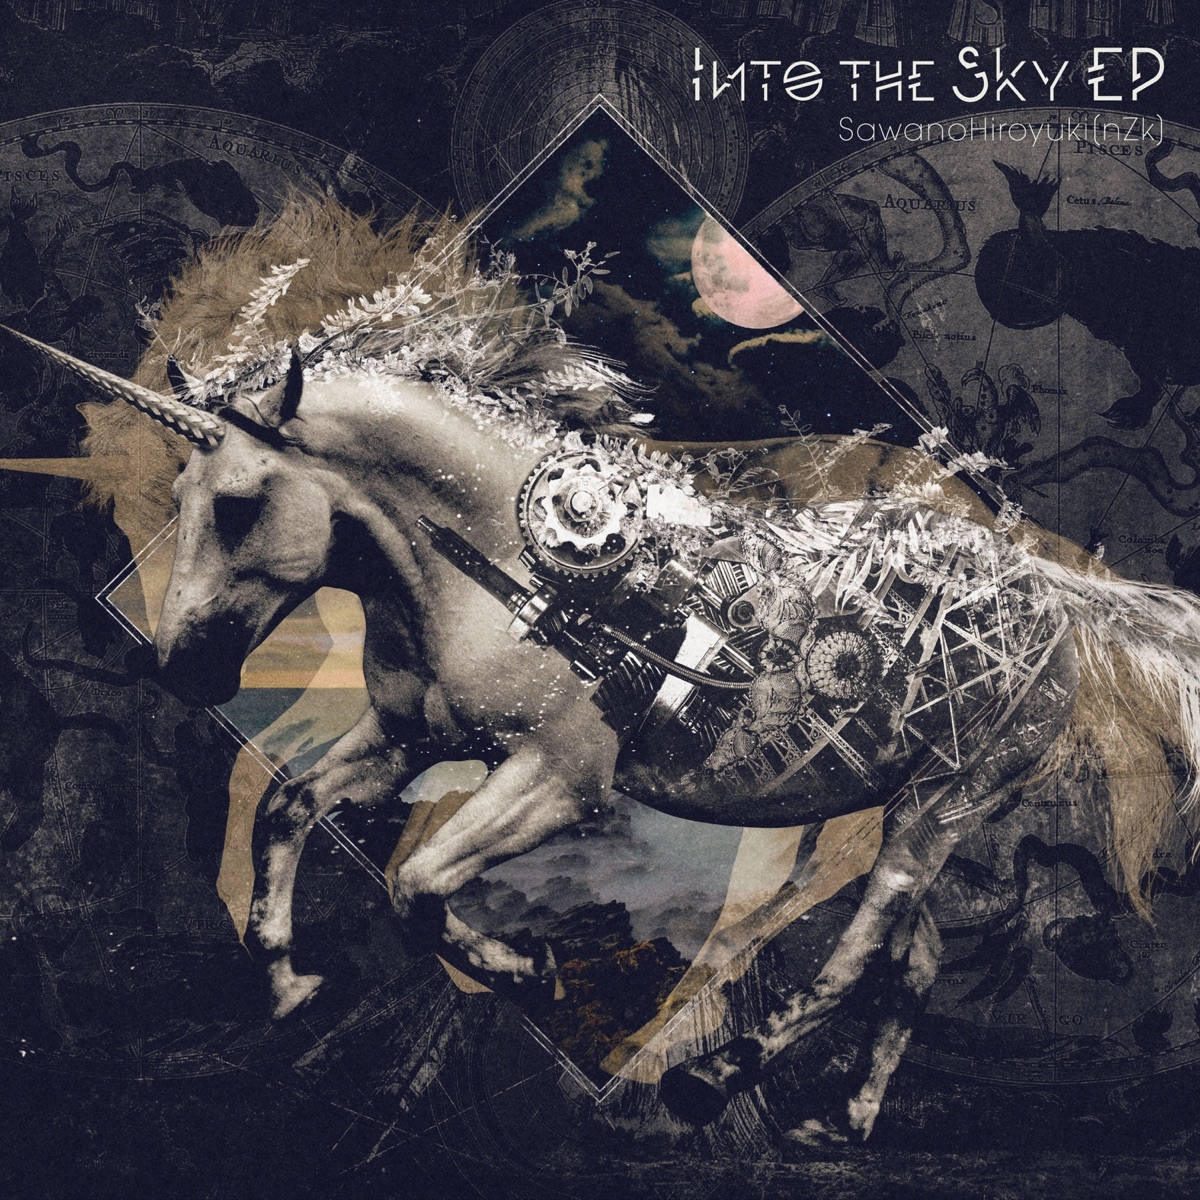 Cover art for『SawanoHiroyuki[nZk]:Tielle - Into the Sky』from the release『Into the Sky EP